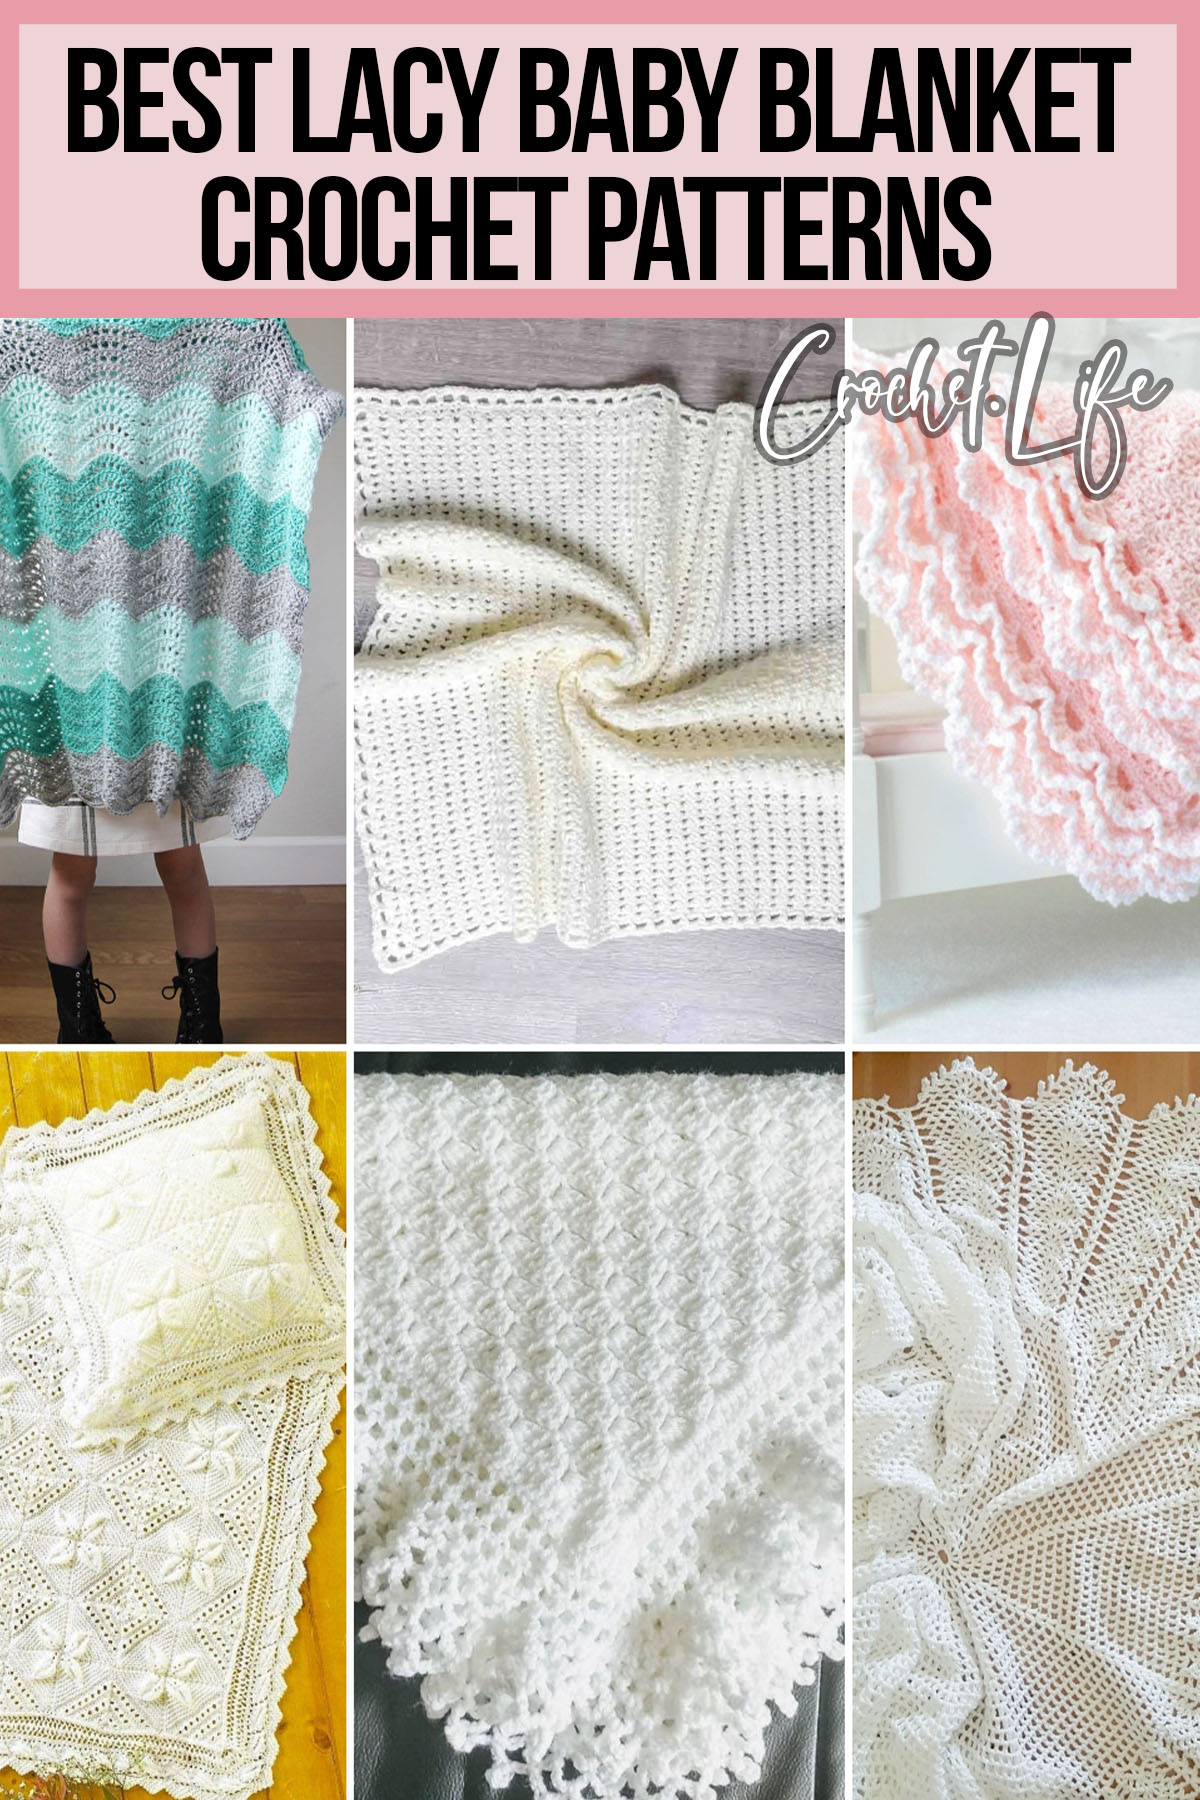 photo collage of patterns for crochet lacy baby blankets with text which reads best lacy baby blanket crochet patterns